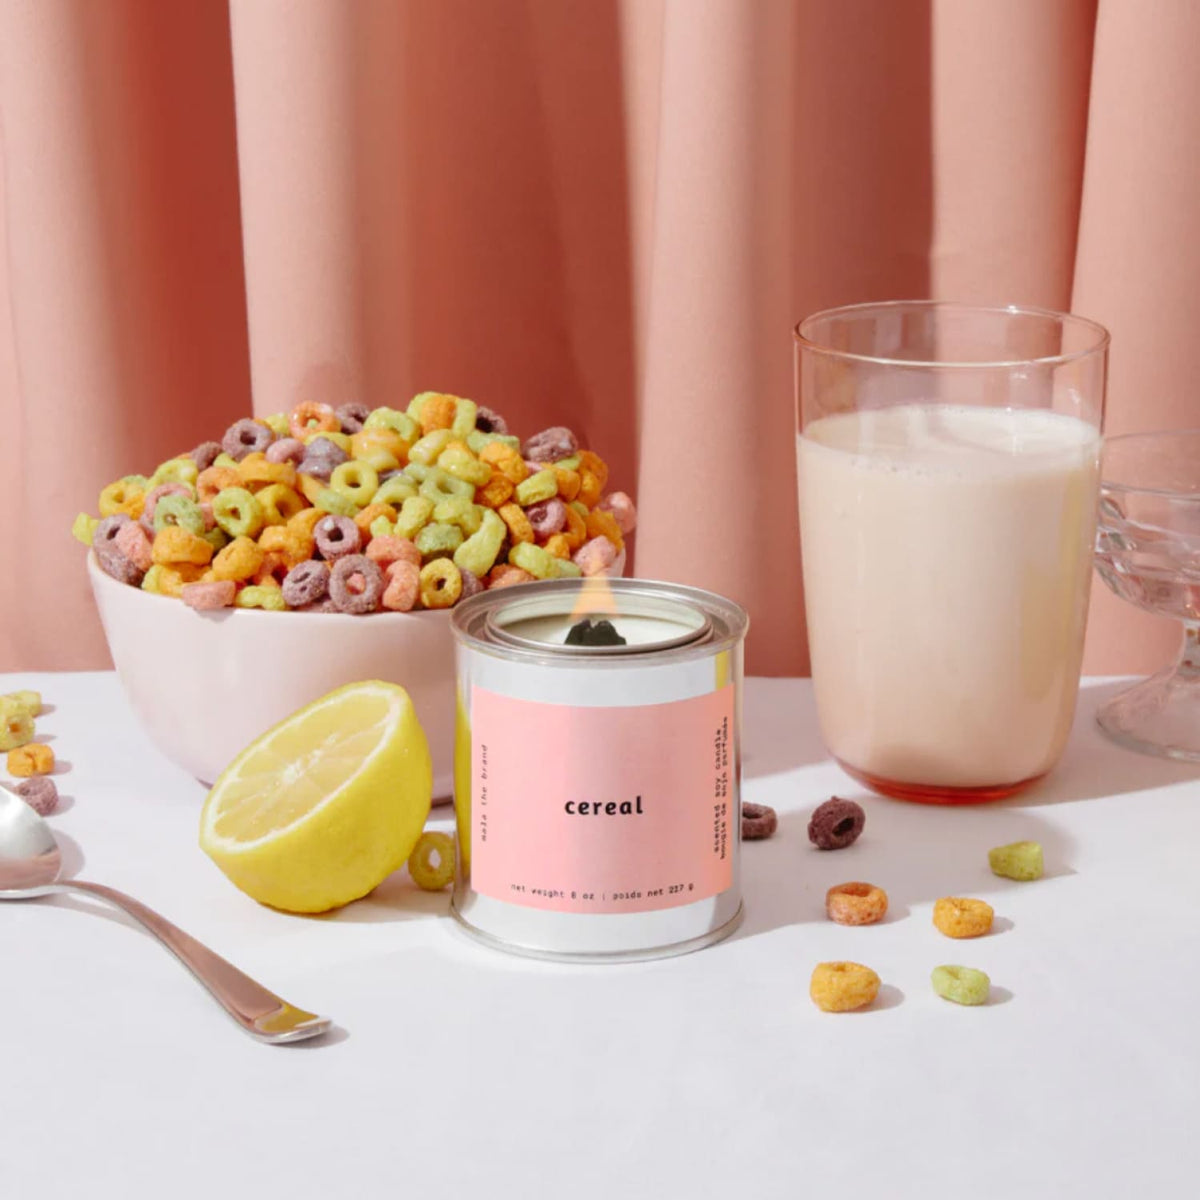 Mala Candle - Cereal Candle - Cereal - Food Novelty - Hand